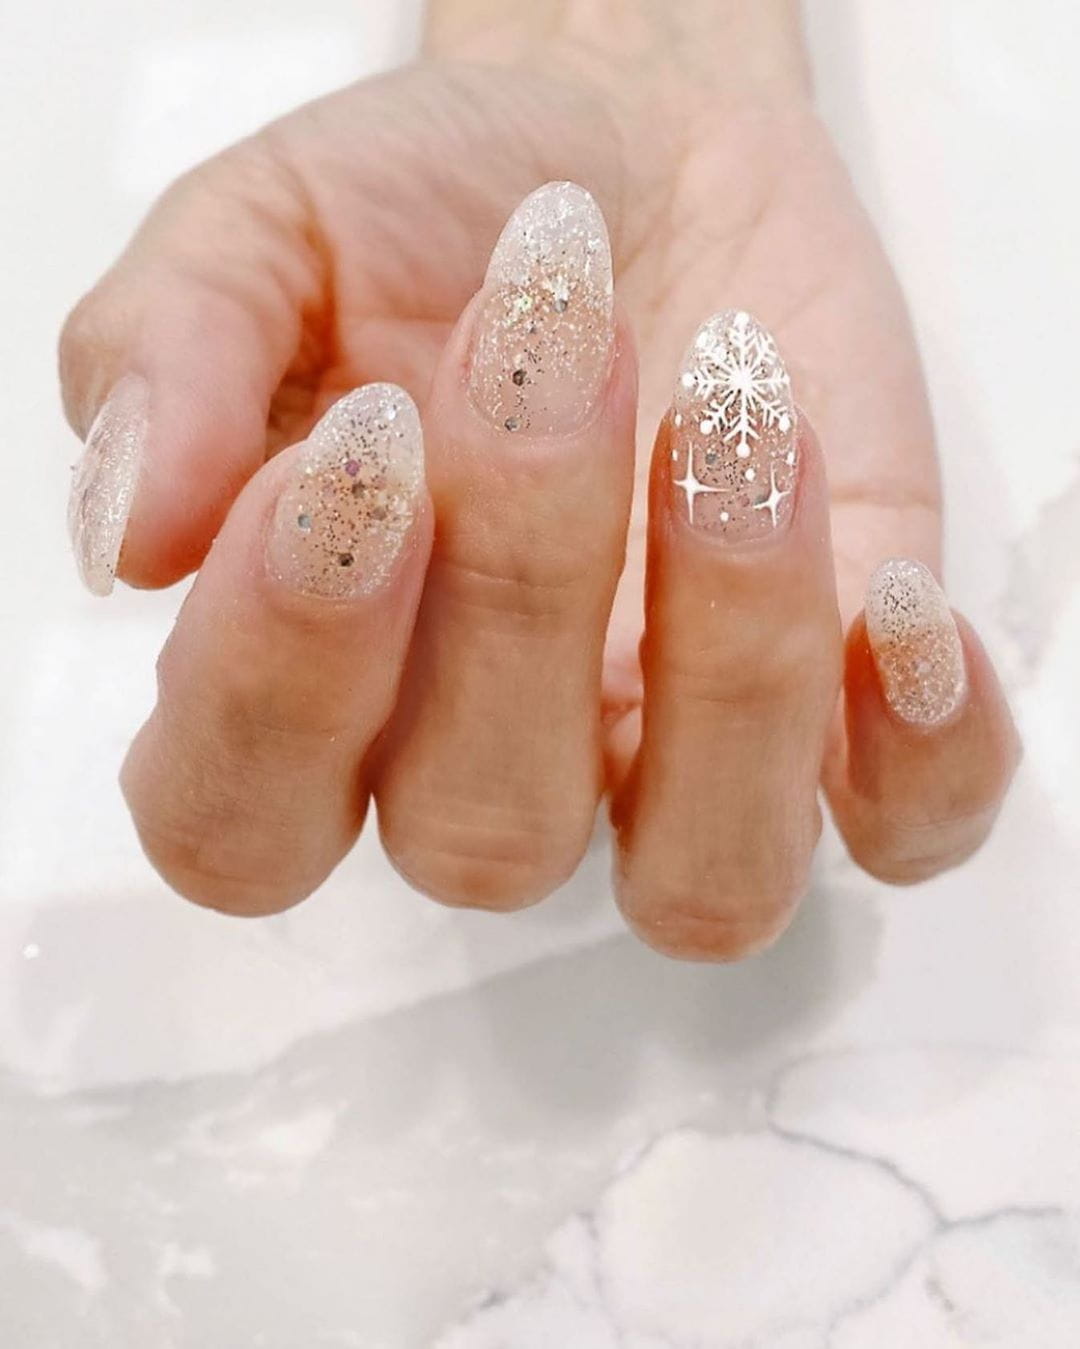 100+ Gorgeous Winter Nail Designs And Ideas images 71